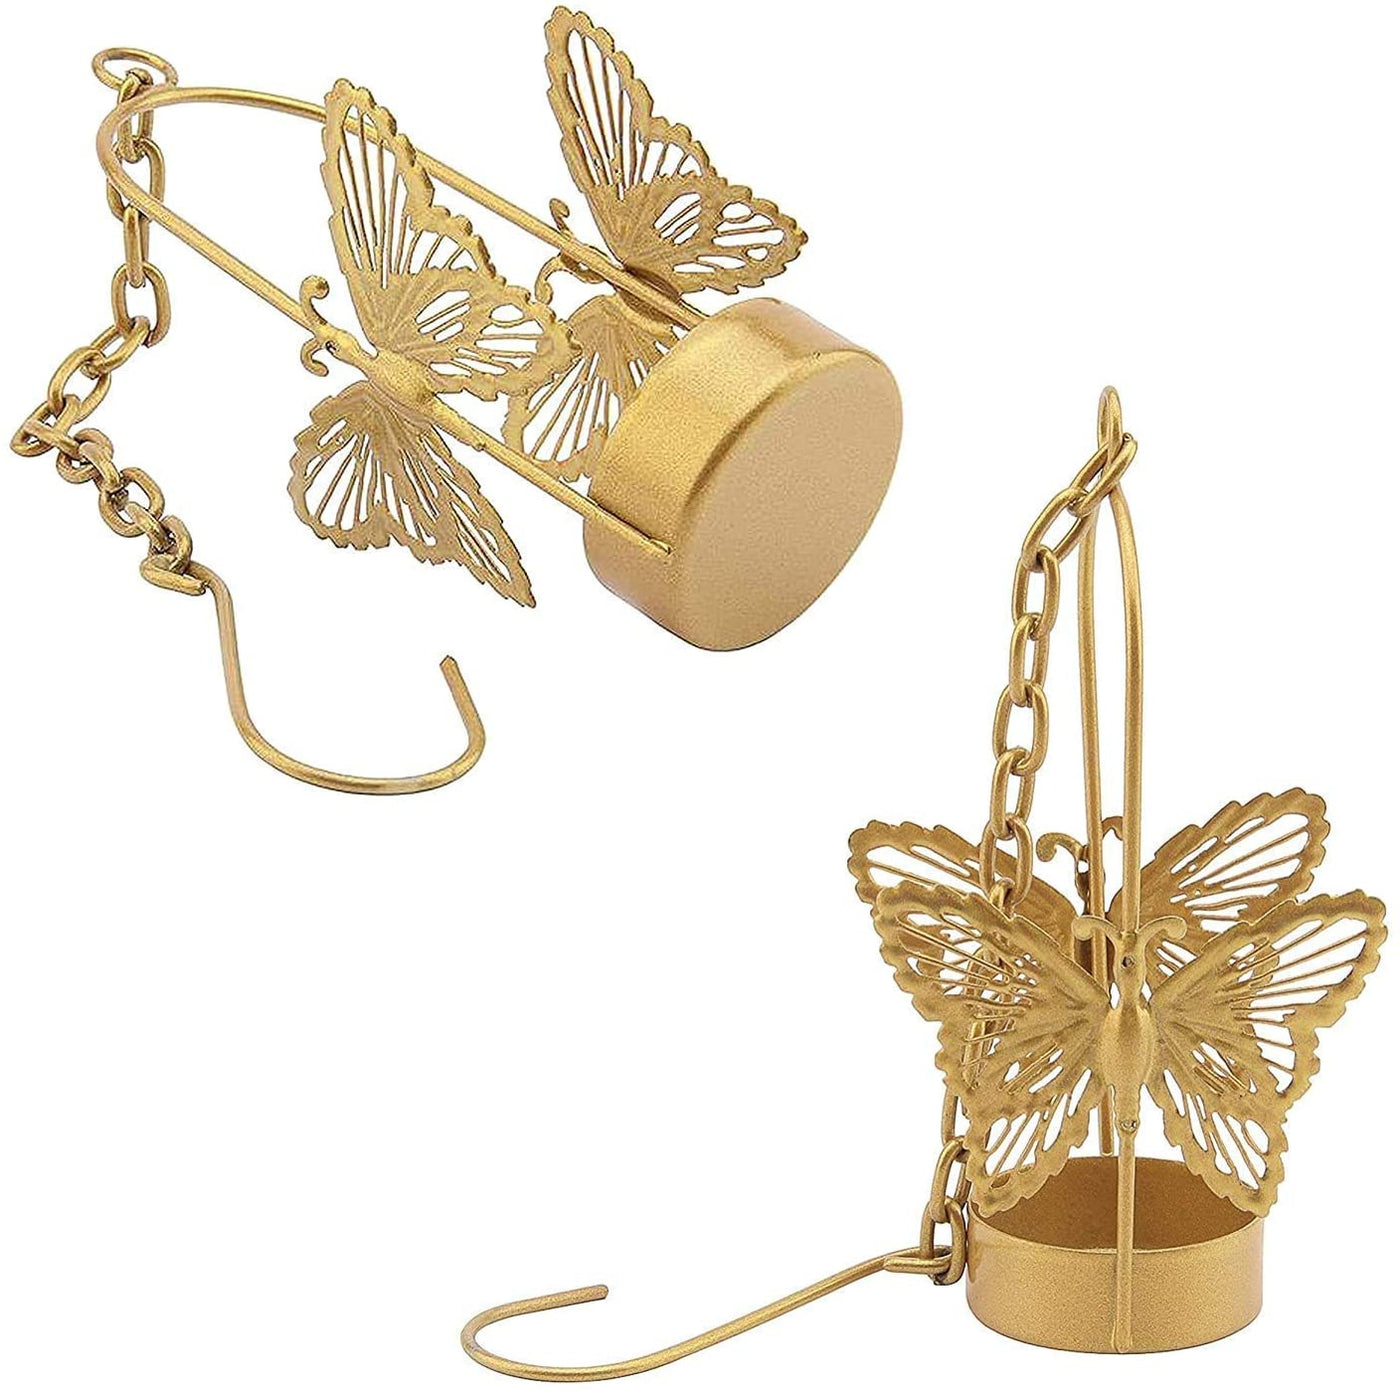 LAMANSH butterfly candle holders LAMANSH® Festive Decorative Hanging Metal Butterfly Tealight Candle Holder for Home Decor with Chain Hangs for Diwali, Christmas Home and Party Decorations